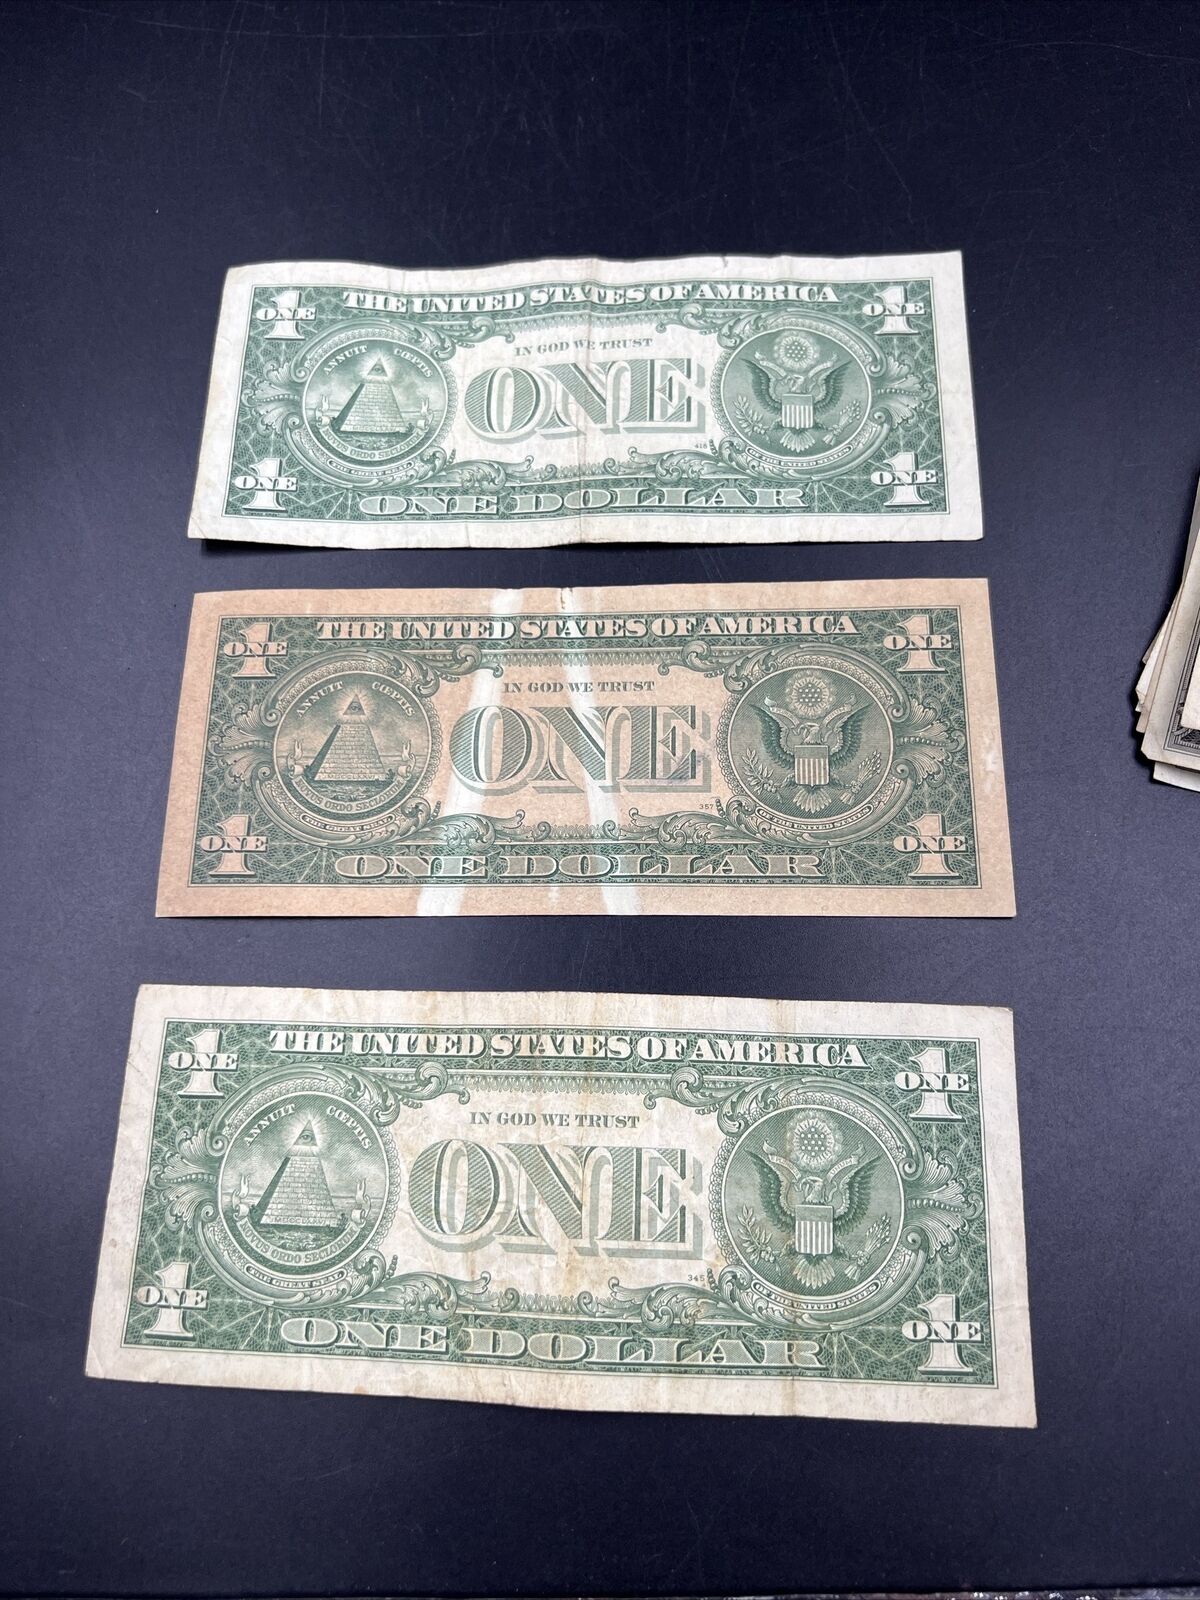 Lot of 3 1957 A B SET $1 Silver Certificate Blue Seal Notes Choice VG + #981